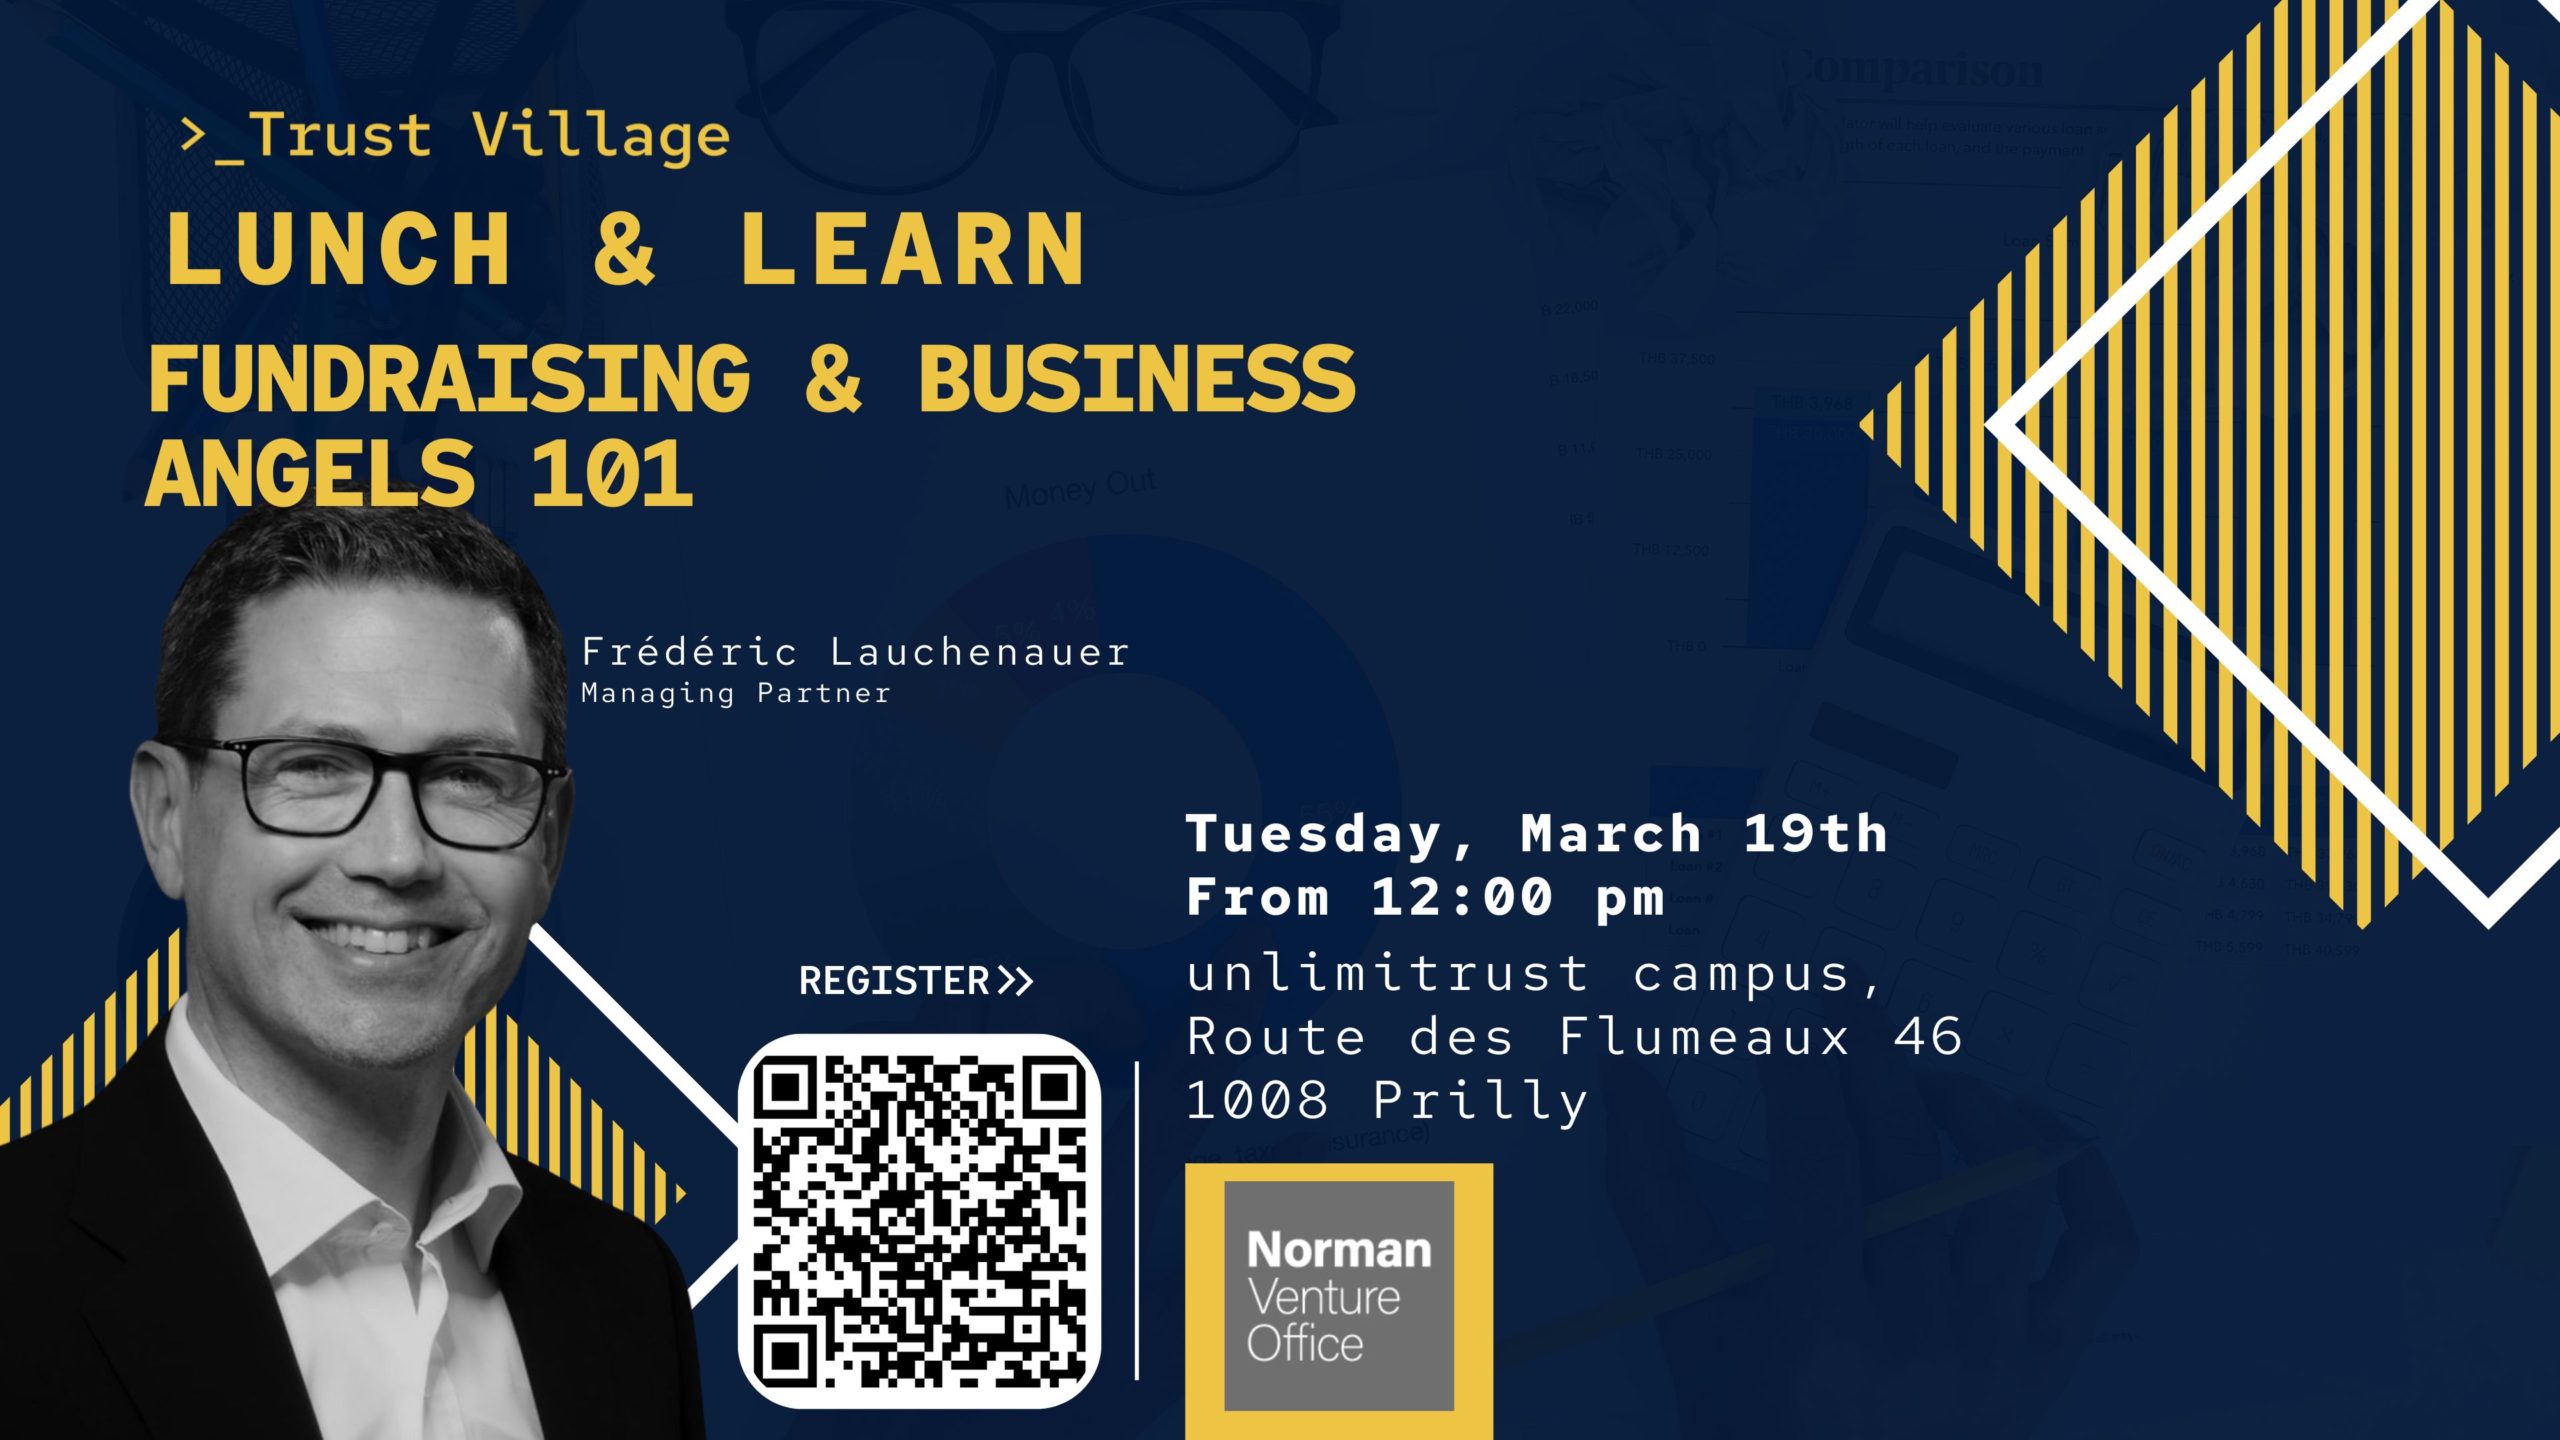 Lunch&Learn Fundraising & Business Angels 101